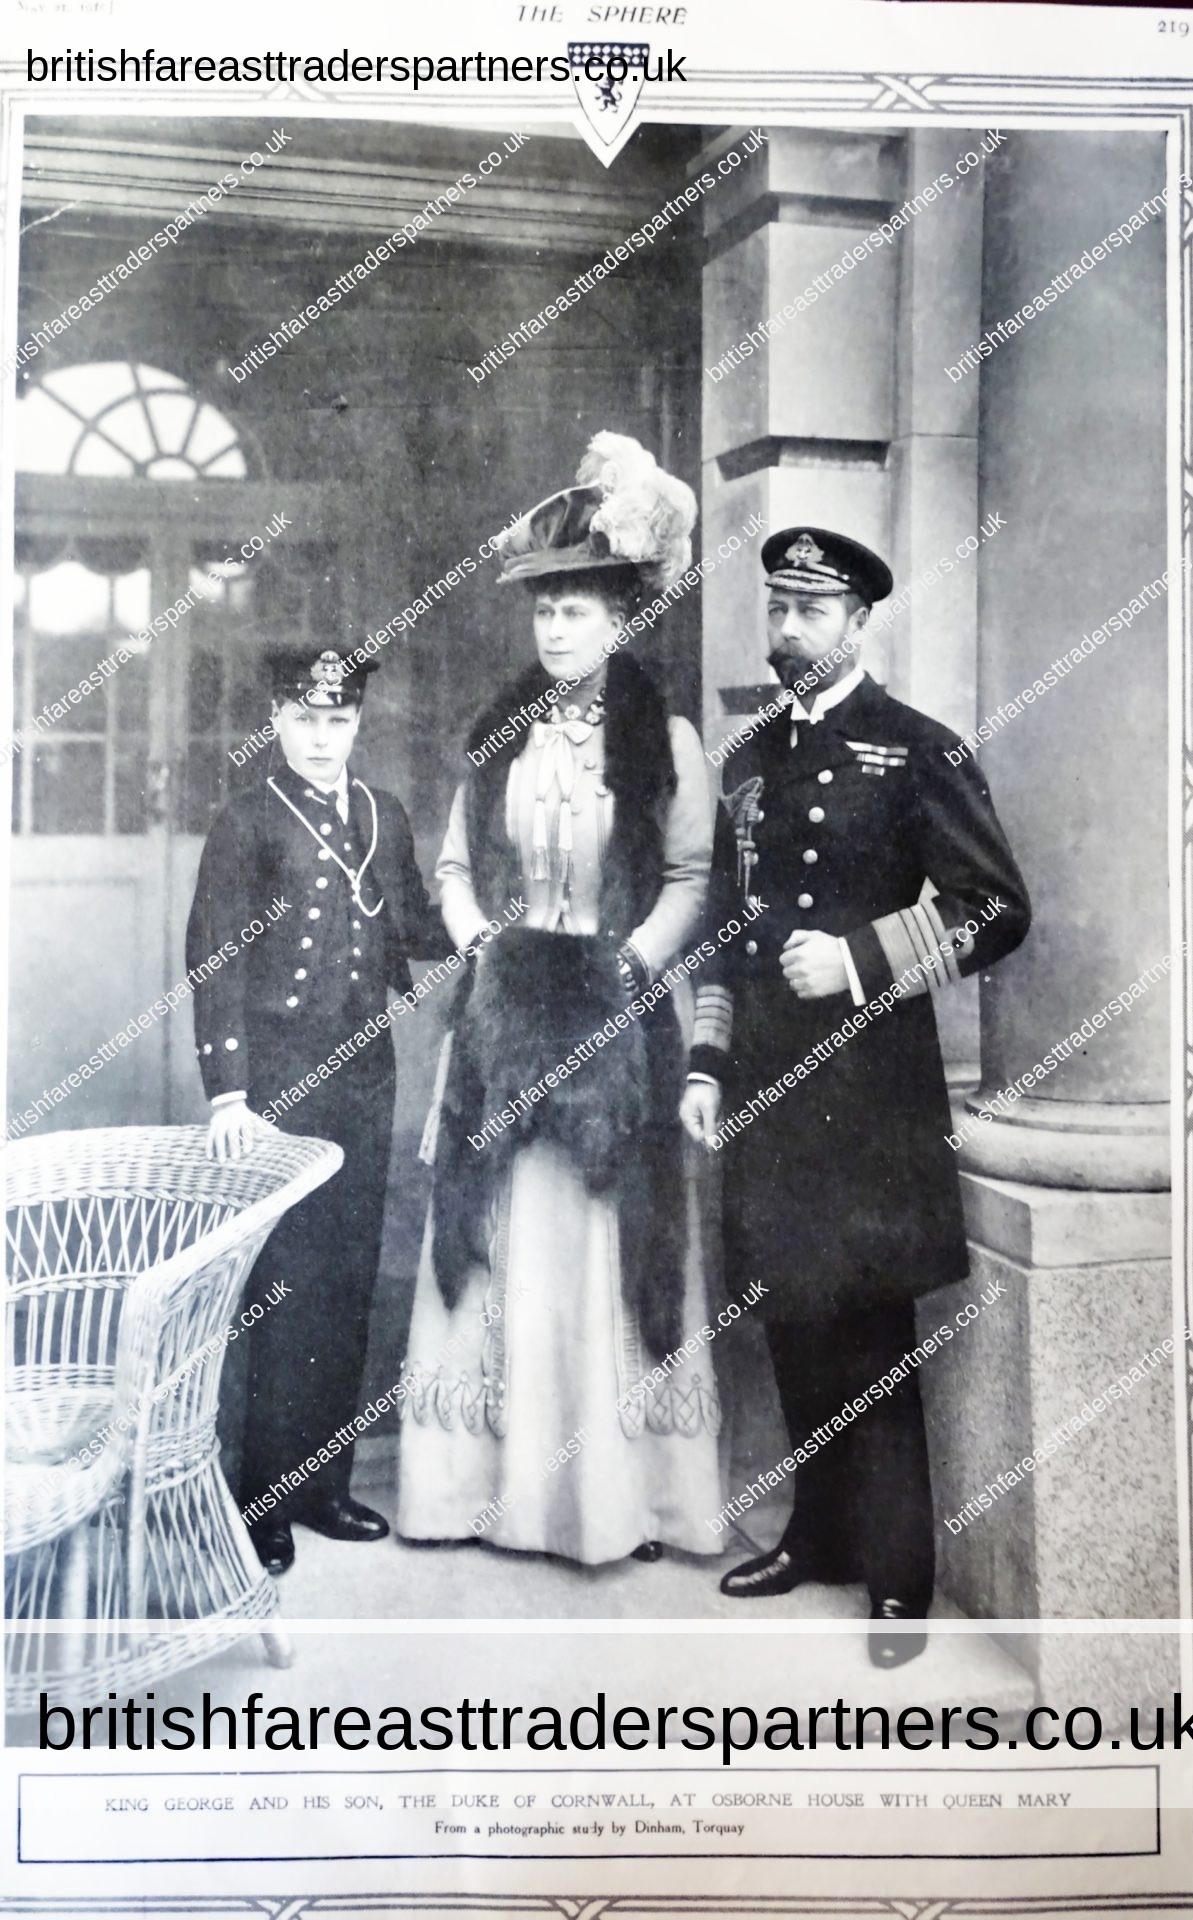 ANTIQUE PHOTOS & IMAGES MAY 21, 1910 THE SPHERE MAGAZINE LONDON, ENGLAND FEATURING: KING GEORGE V AND HIS SON, THE DUKE OF CORNWALL AT OSBORNE HOUSE WITH QUEEN MARY ROYALTY | COLLECTABLES | HISTORY | MEMORABILIA | EPHEMERA